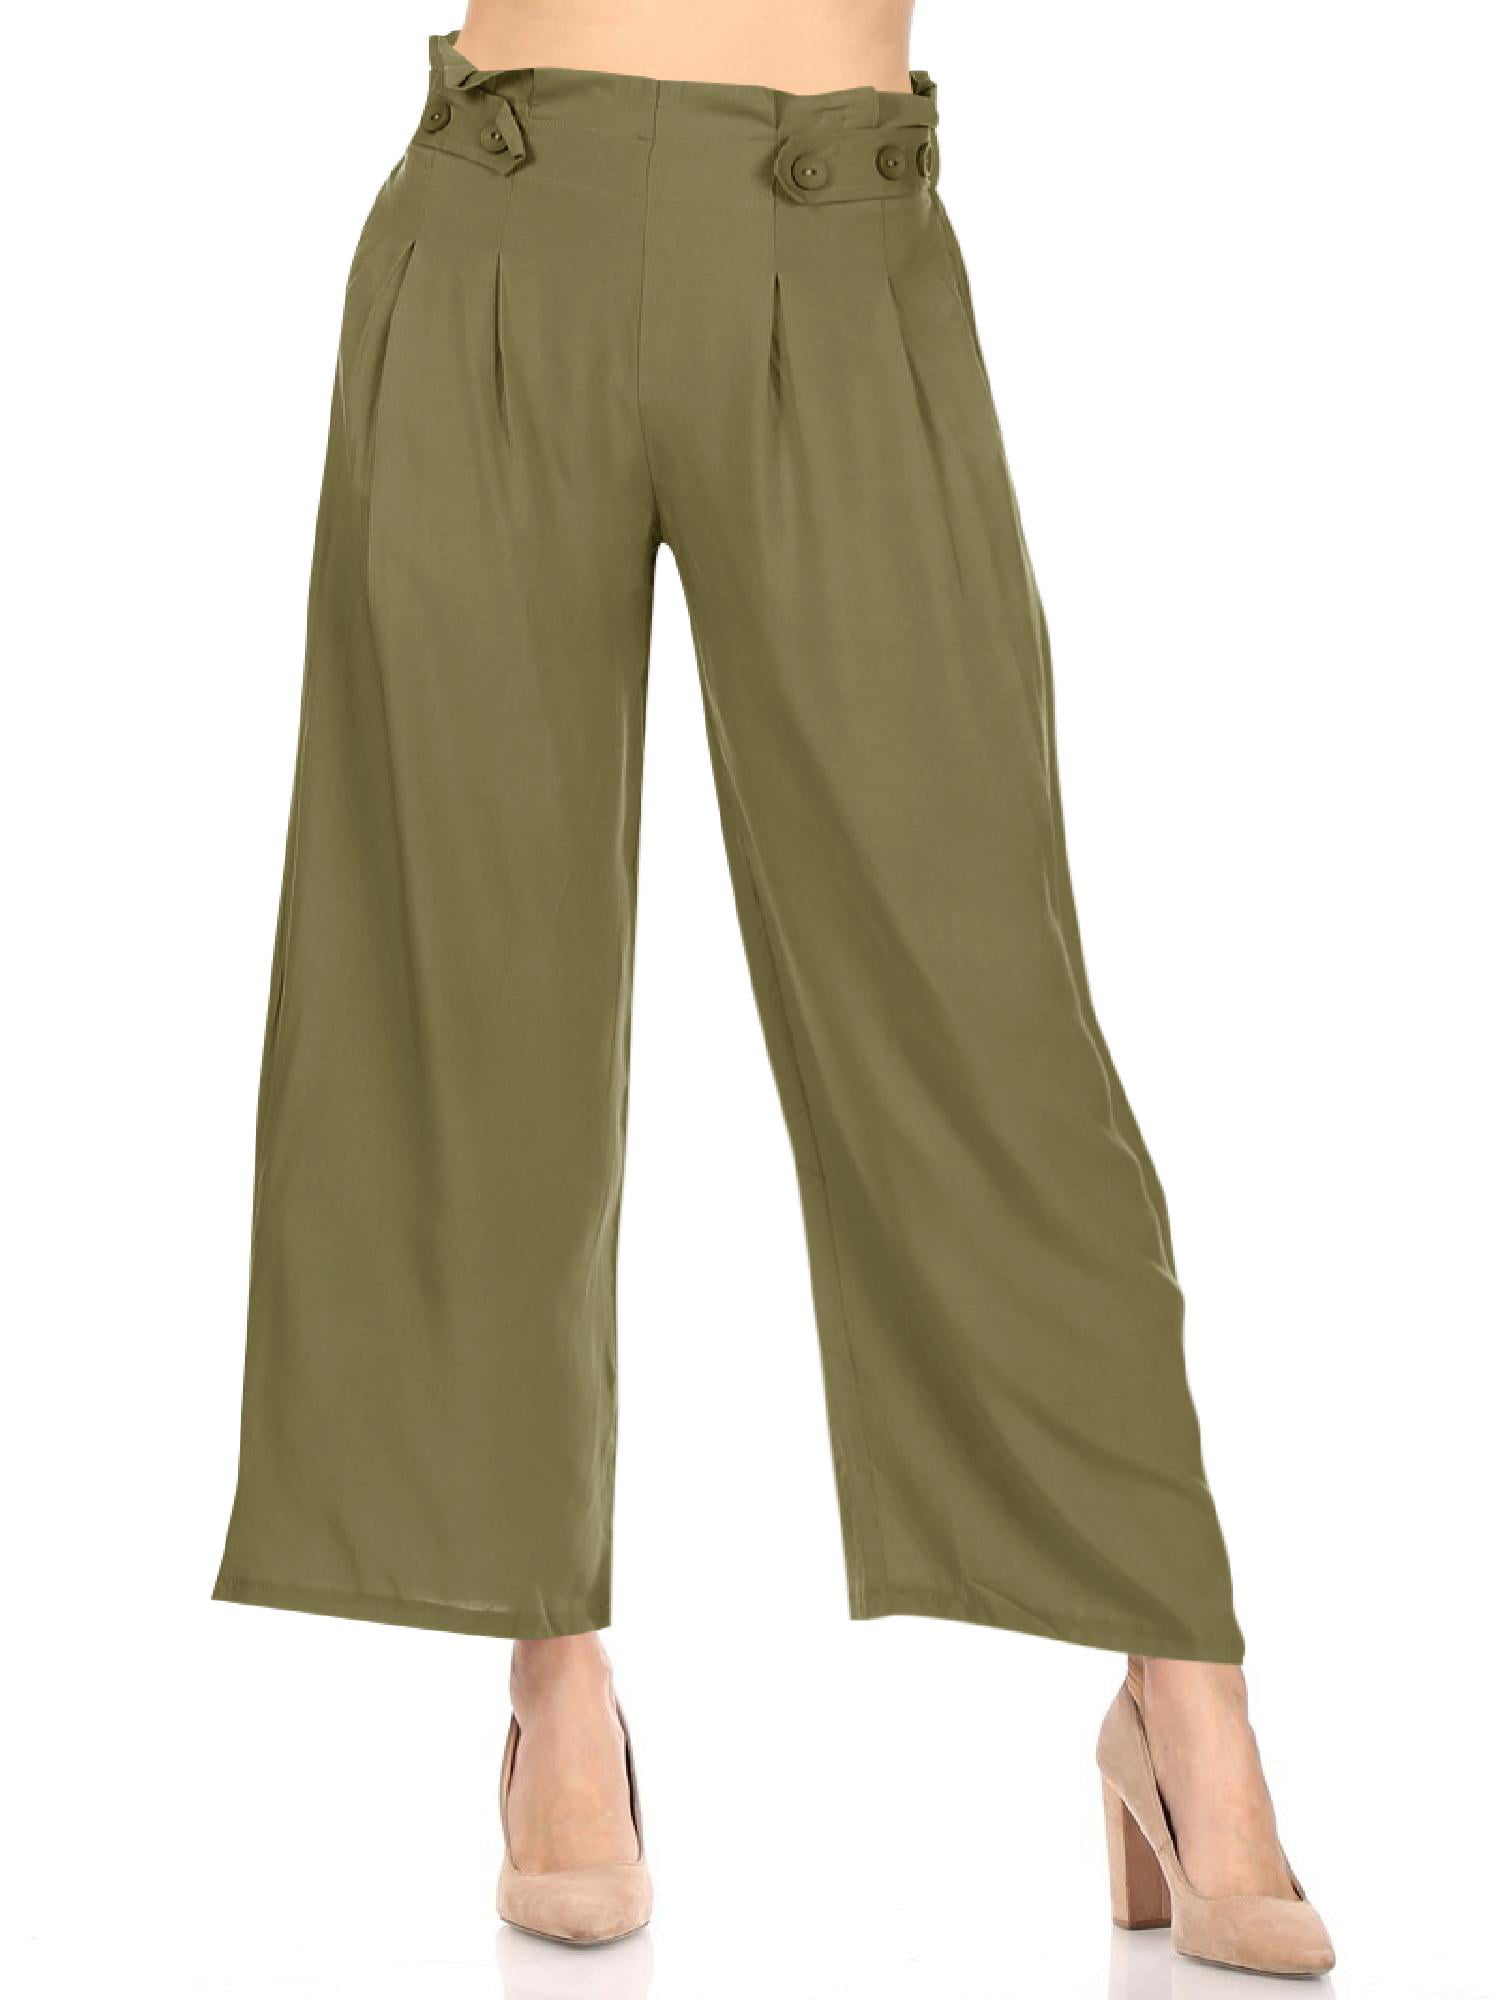 16 Pairs Of Elastic-Waist Pants To Buy ASAP – PureWow, 41% OFF